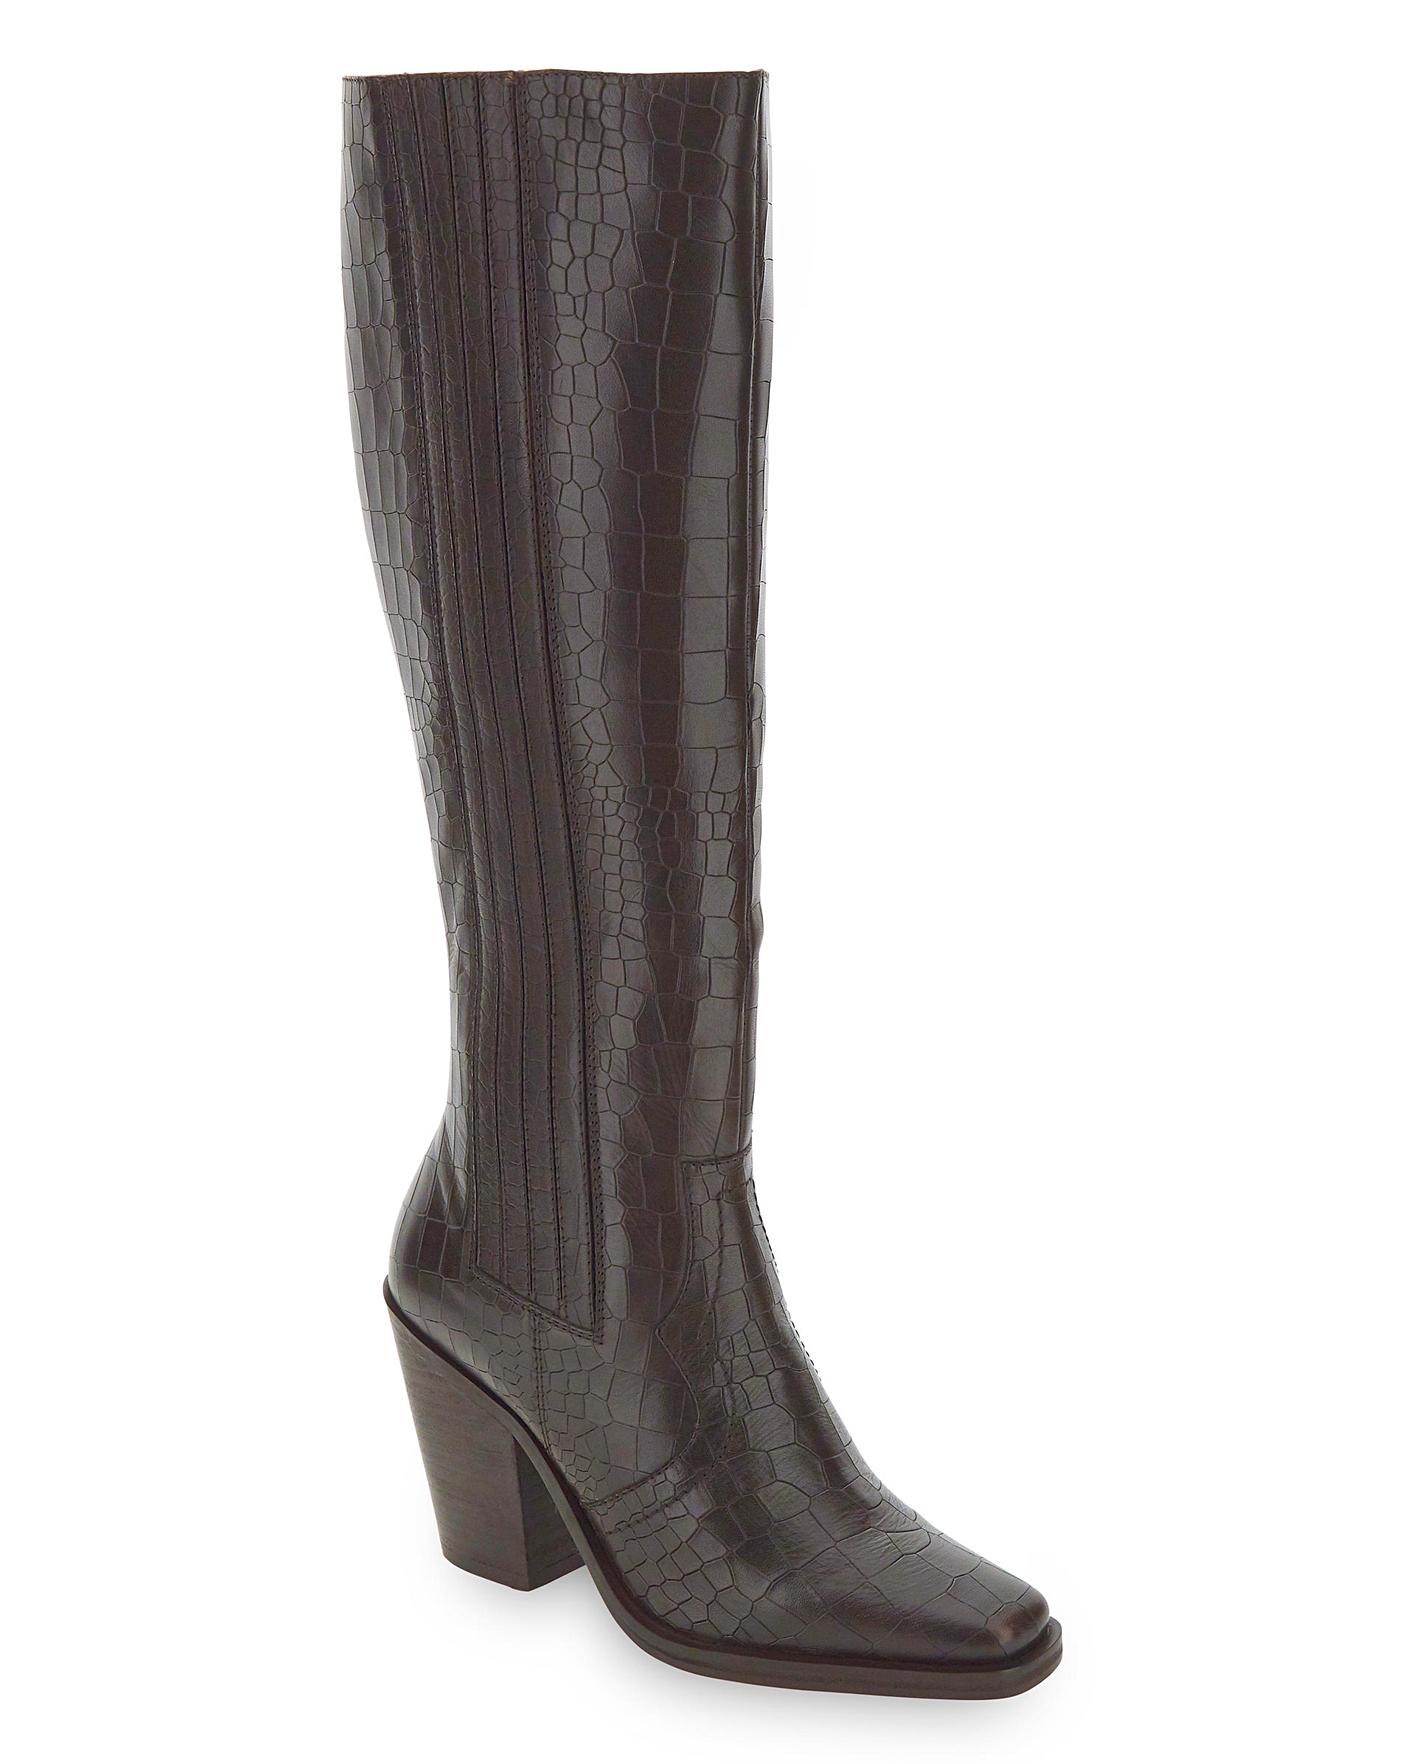 Leather Boots E Fit Standard Calf | J D Williams